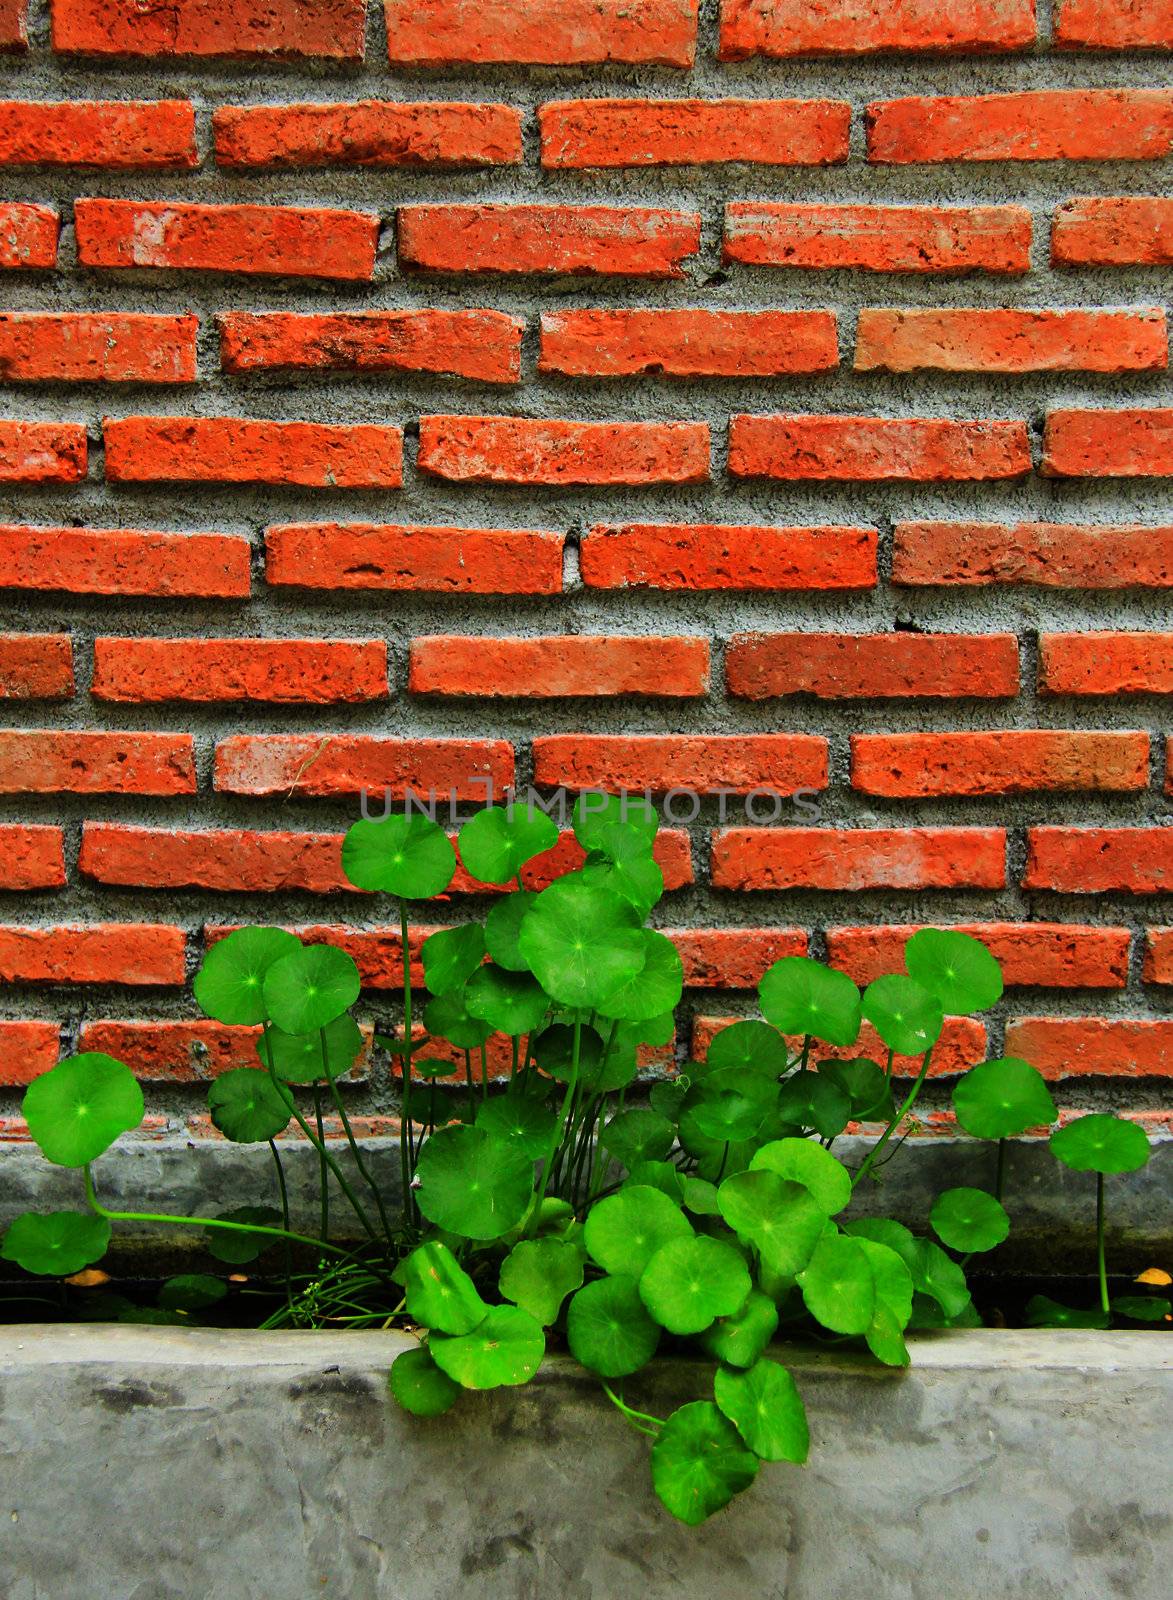 Water plants with brick wall